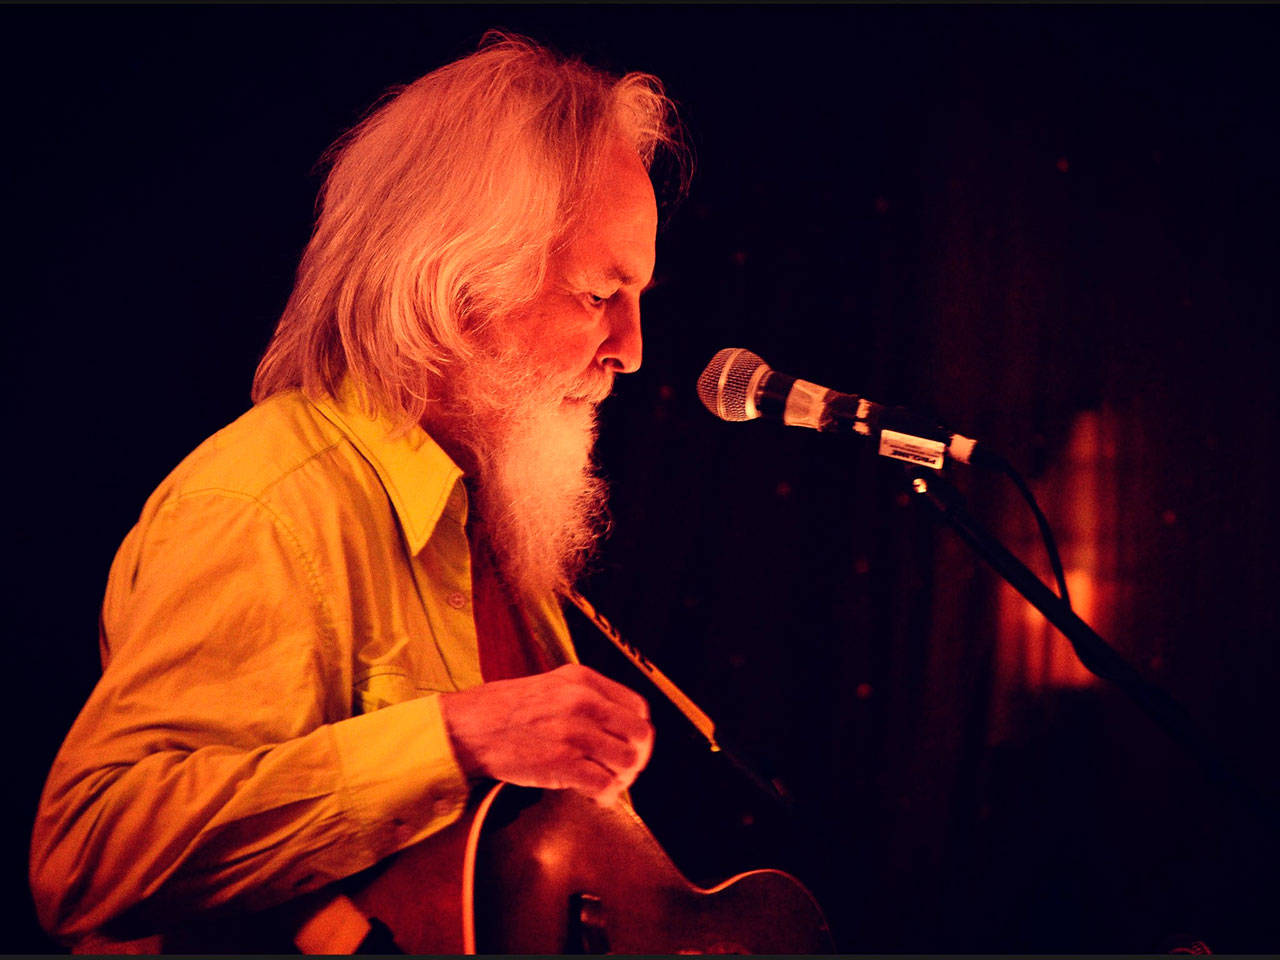 Photo courtesy of Donna Mavity | Gurf Morlix, who has produced iconic and award-winning albums for the likes of Lucinda Williams, Ray Wylie Hubbard, Slaid Cleaves and Robert Earl Keen, among others will be playing an album release show at The Treehouse Café at 8 p.m. Saturday, May 4.